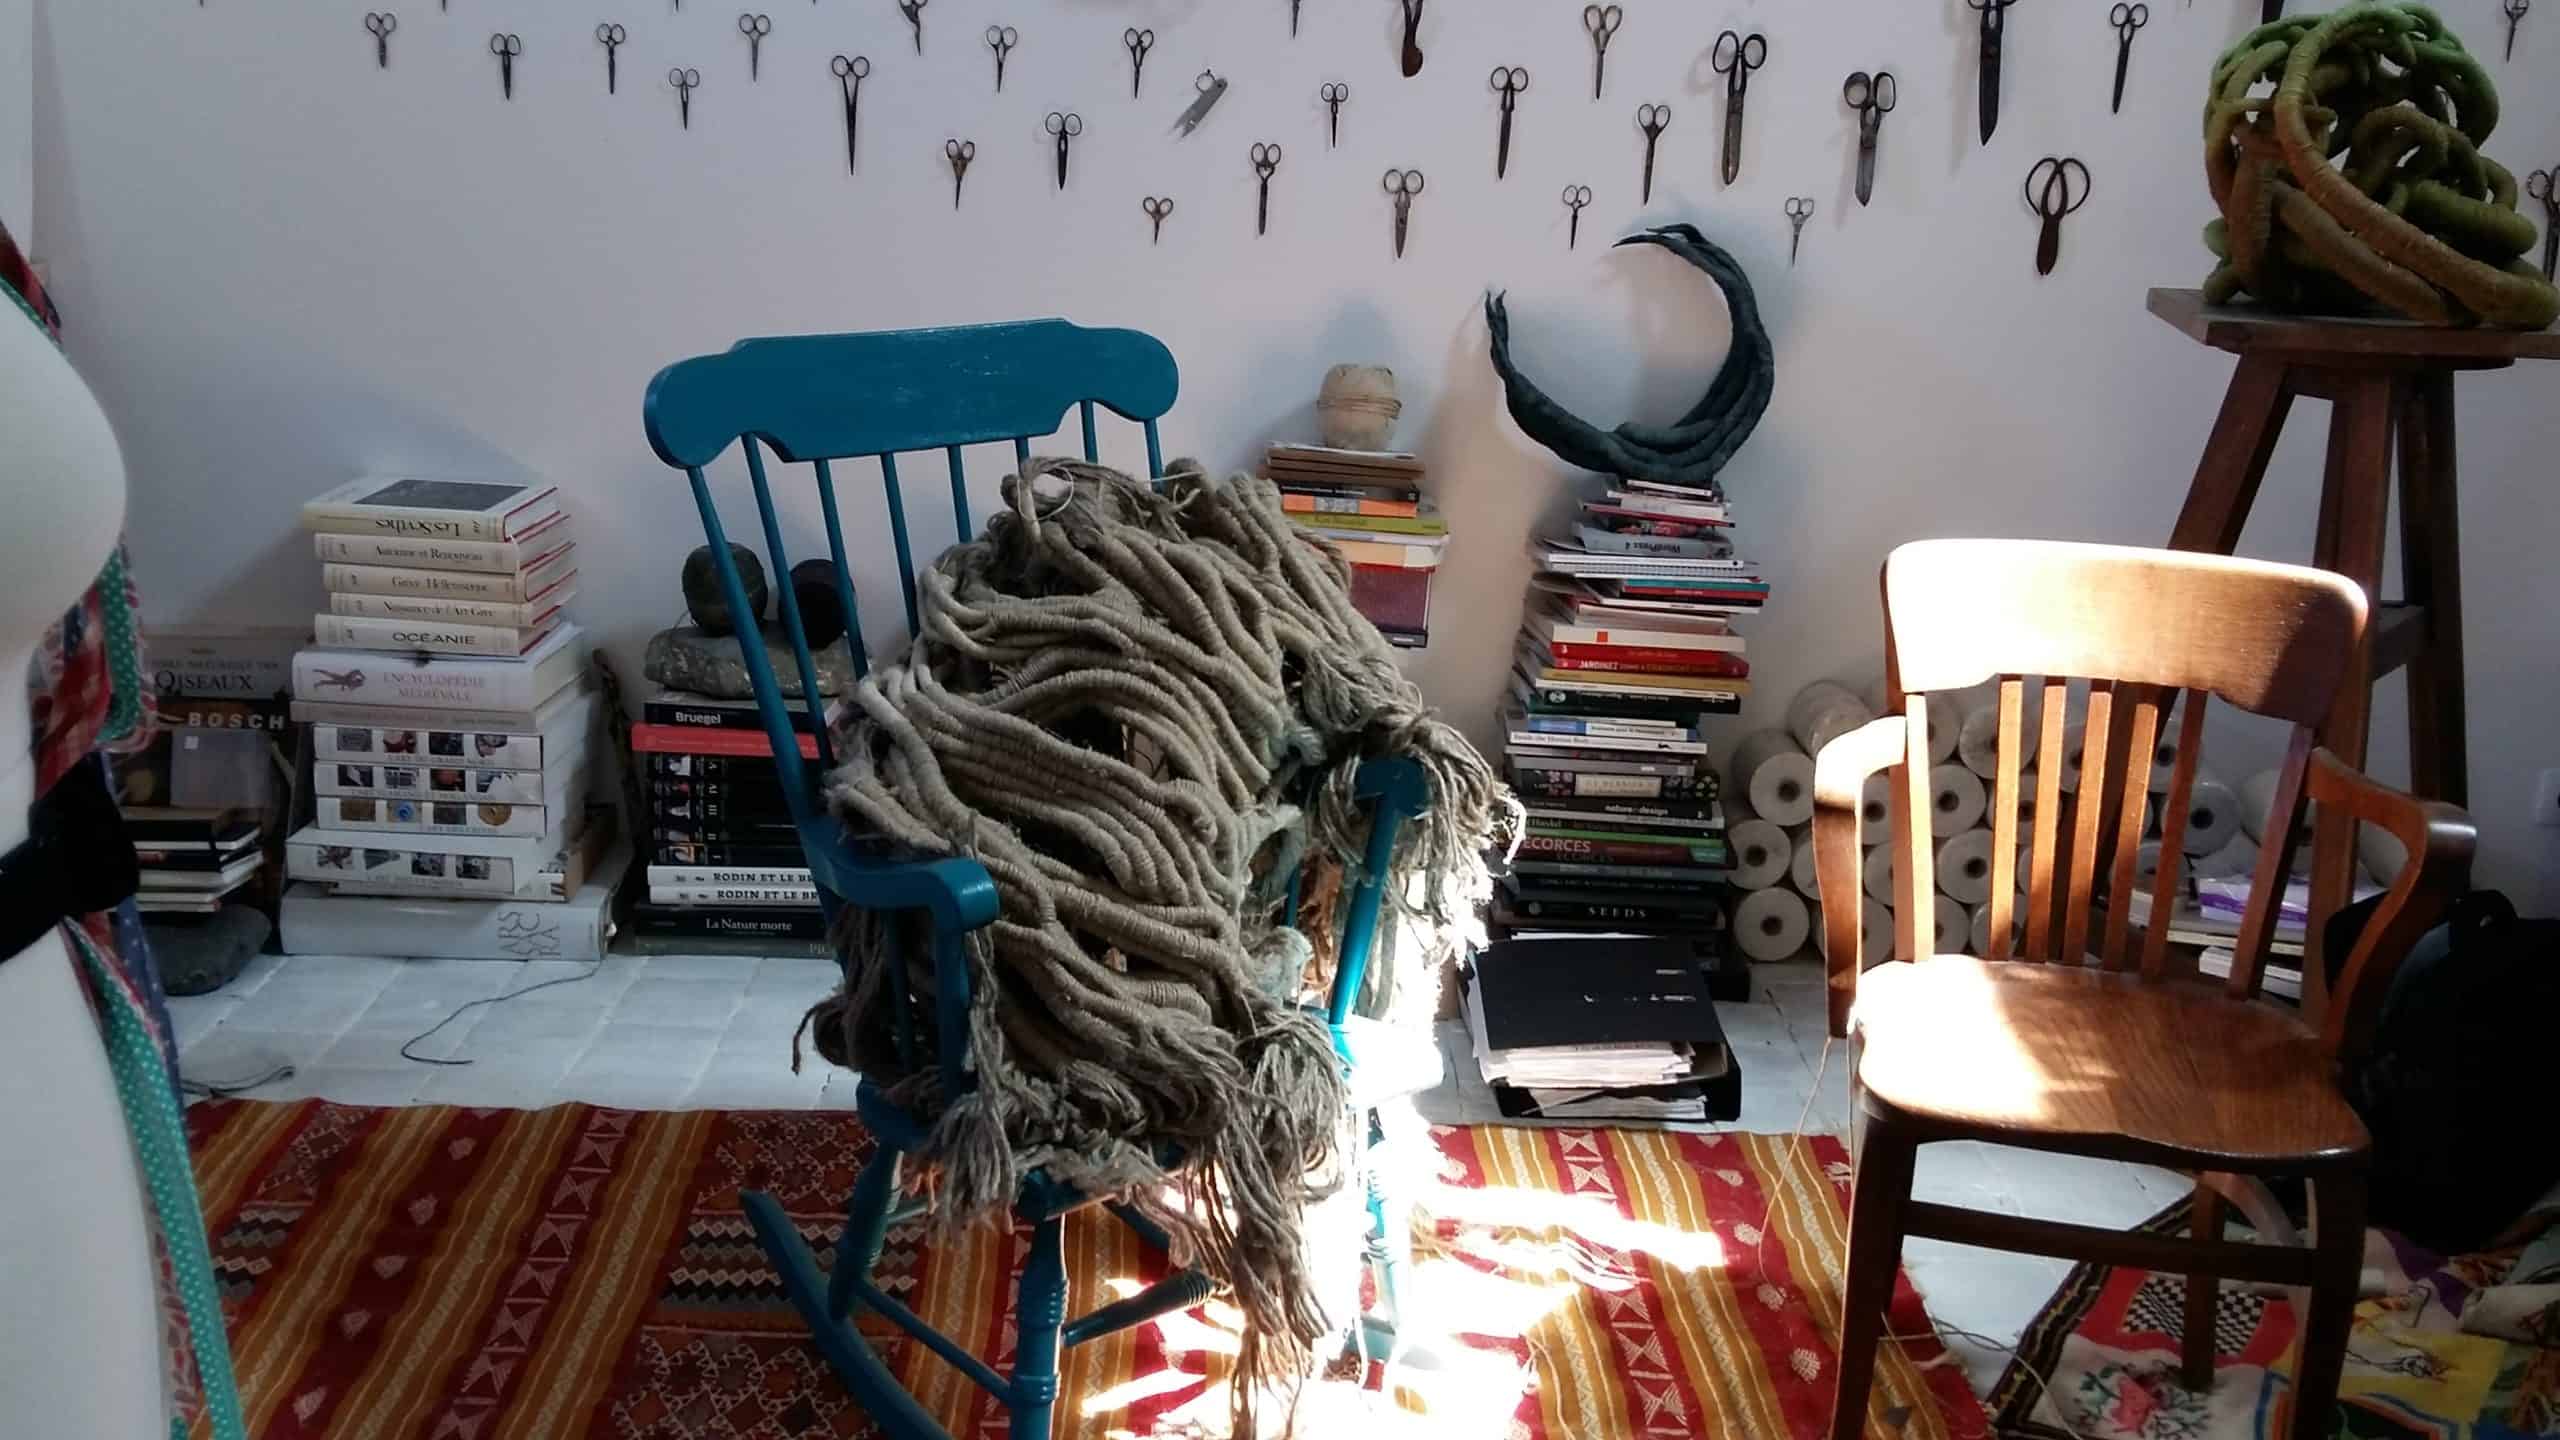 Picture of artist Aude Franjou's workshop depicting a rocking chair with a sculpture on it, and a collection of scissors on the walls.